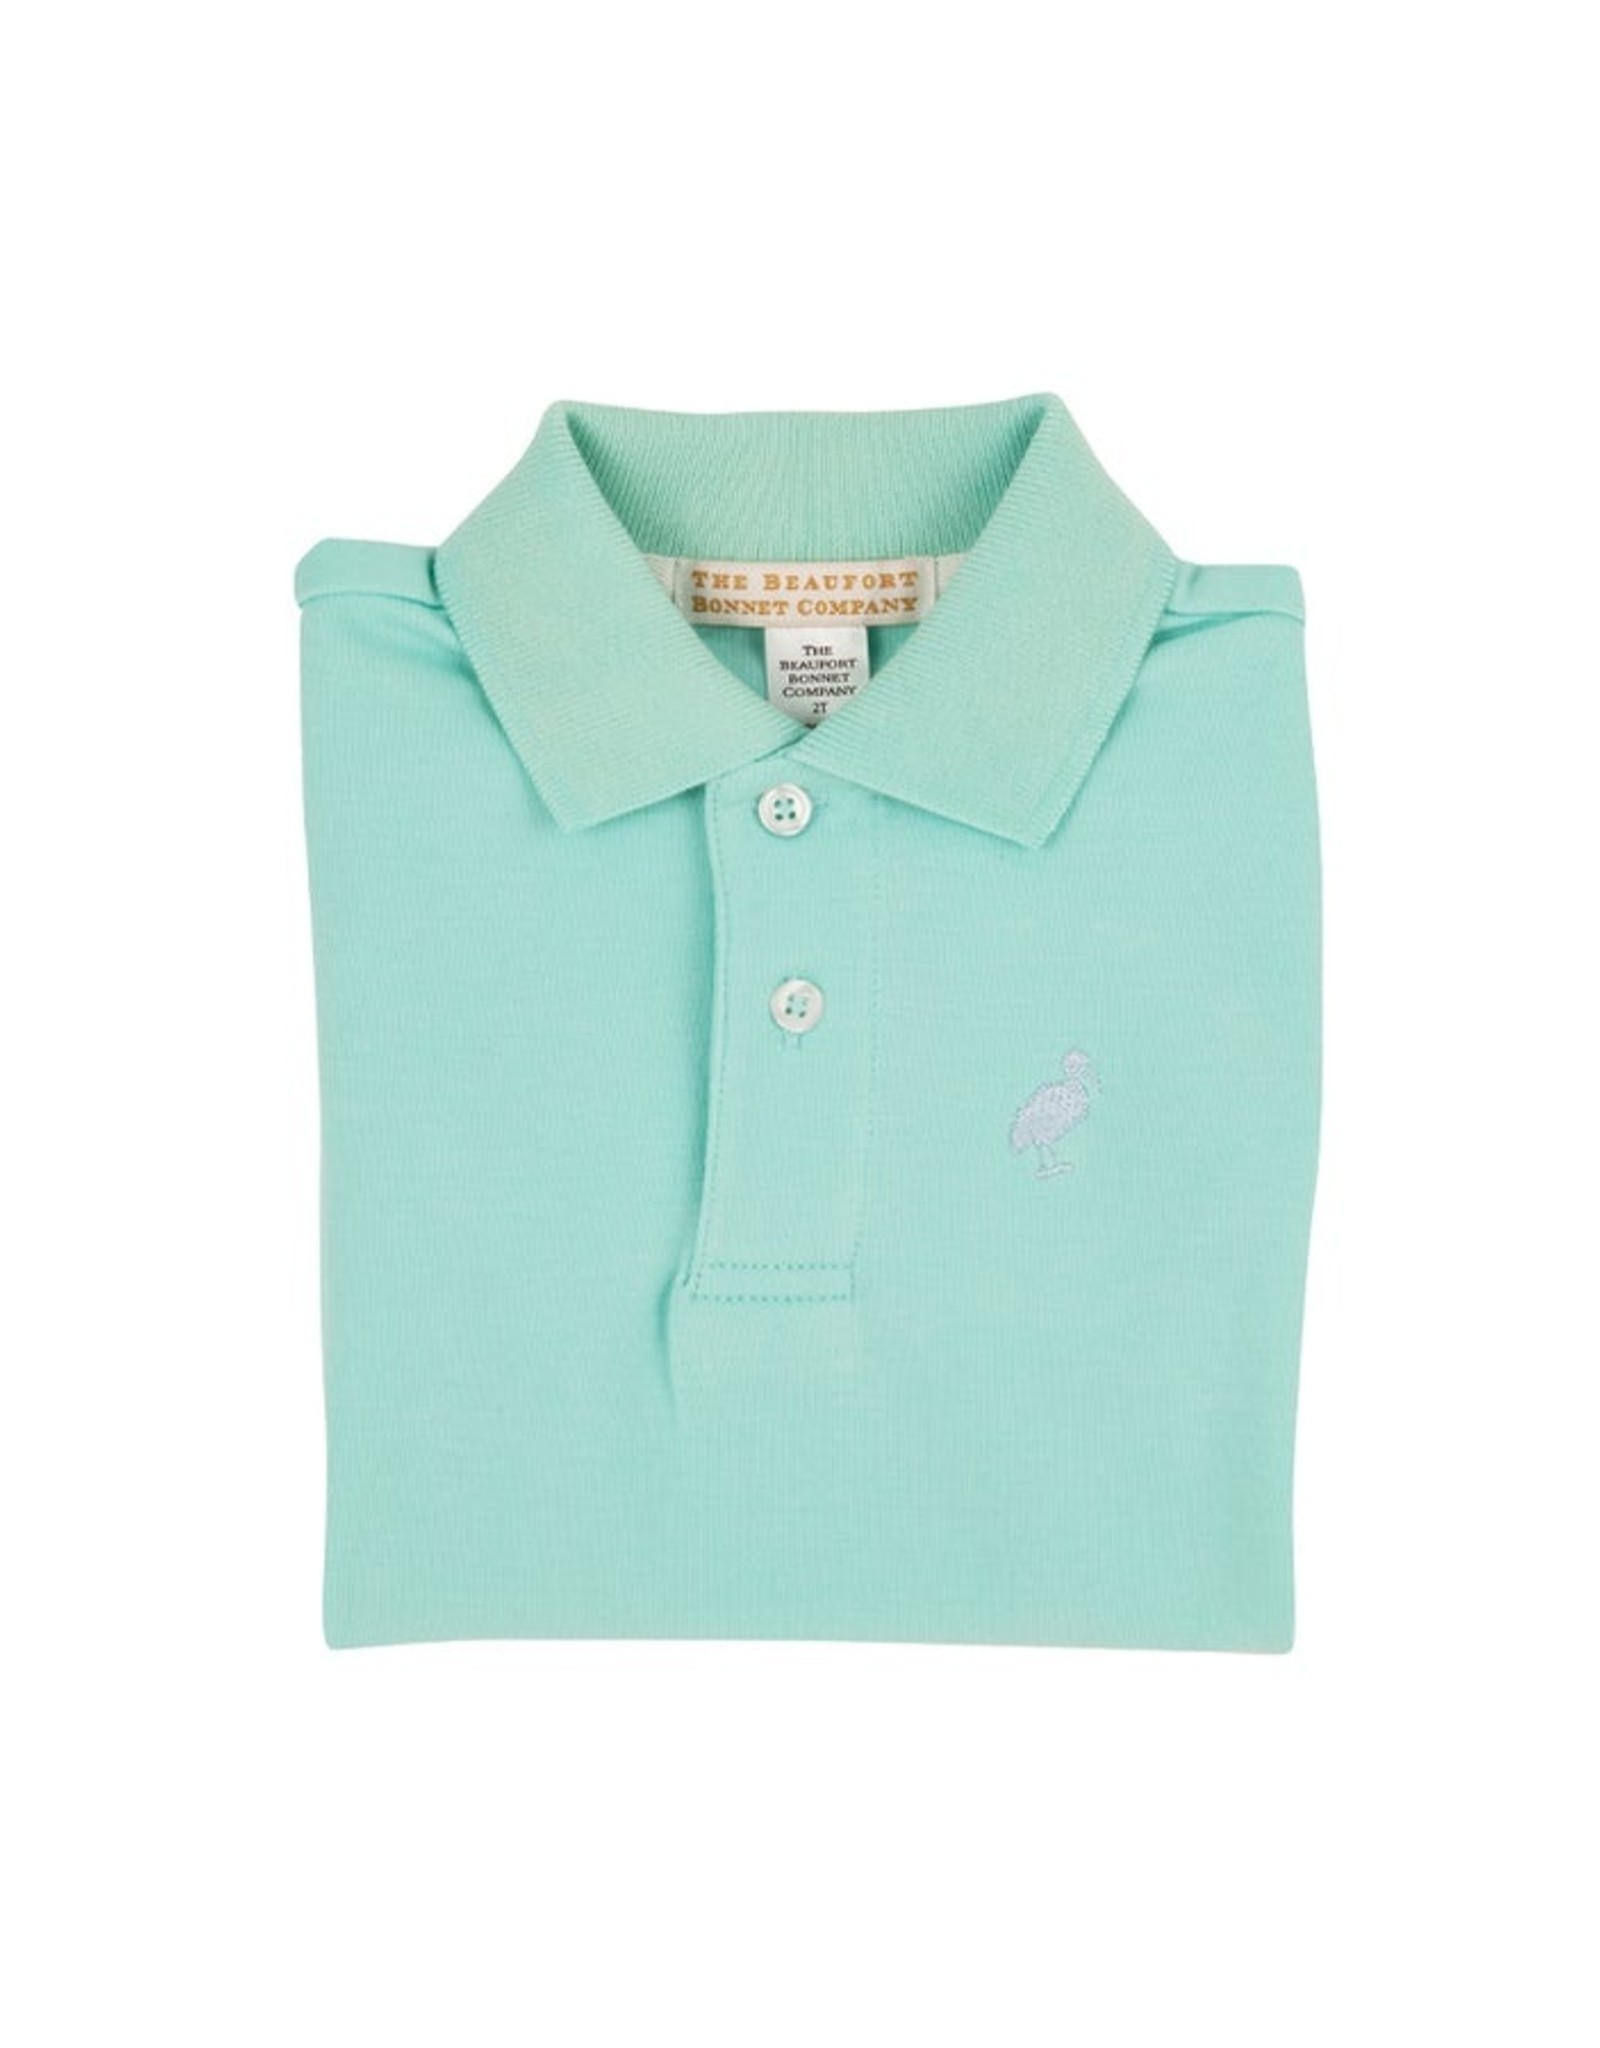 The Beaufort Bonnet Company Prim and Proper SS Polo - Greyson Green